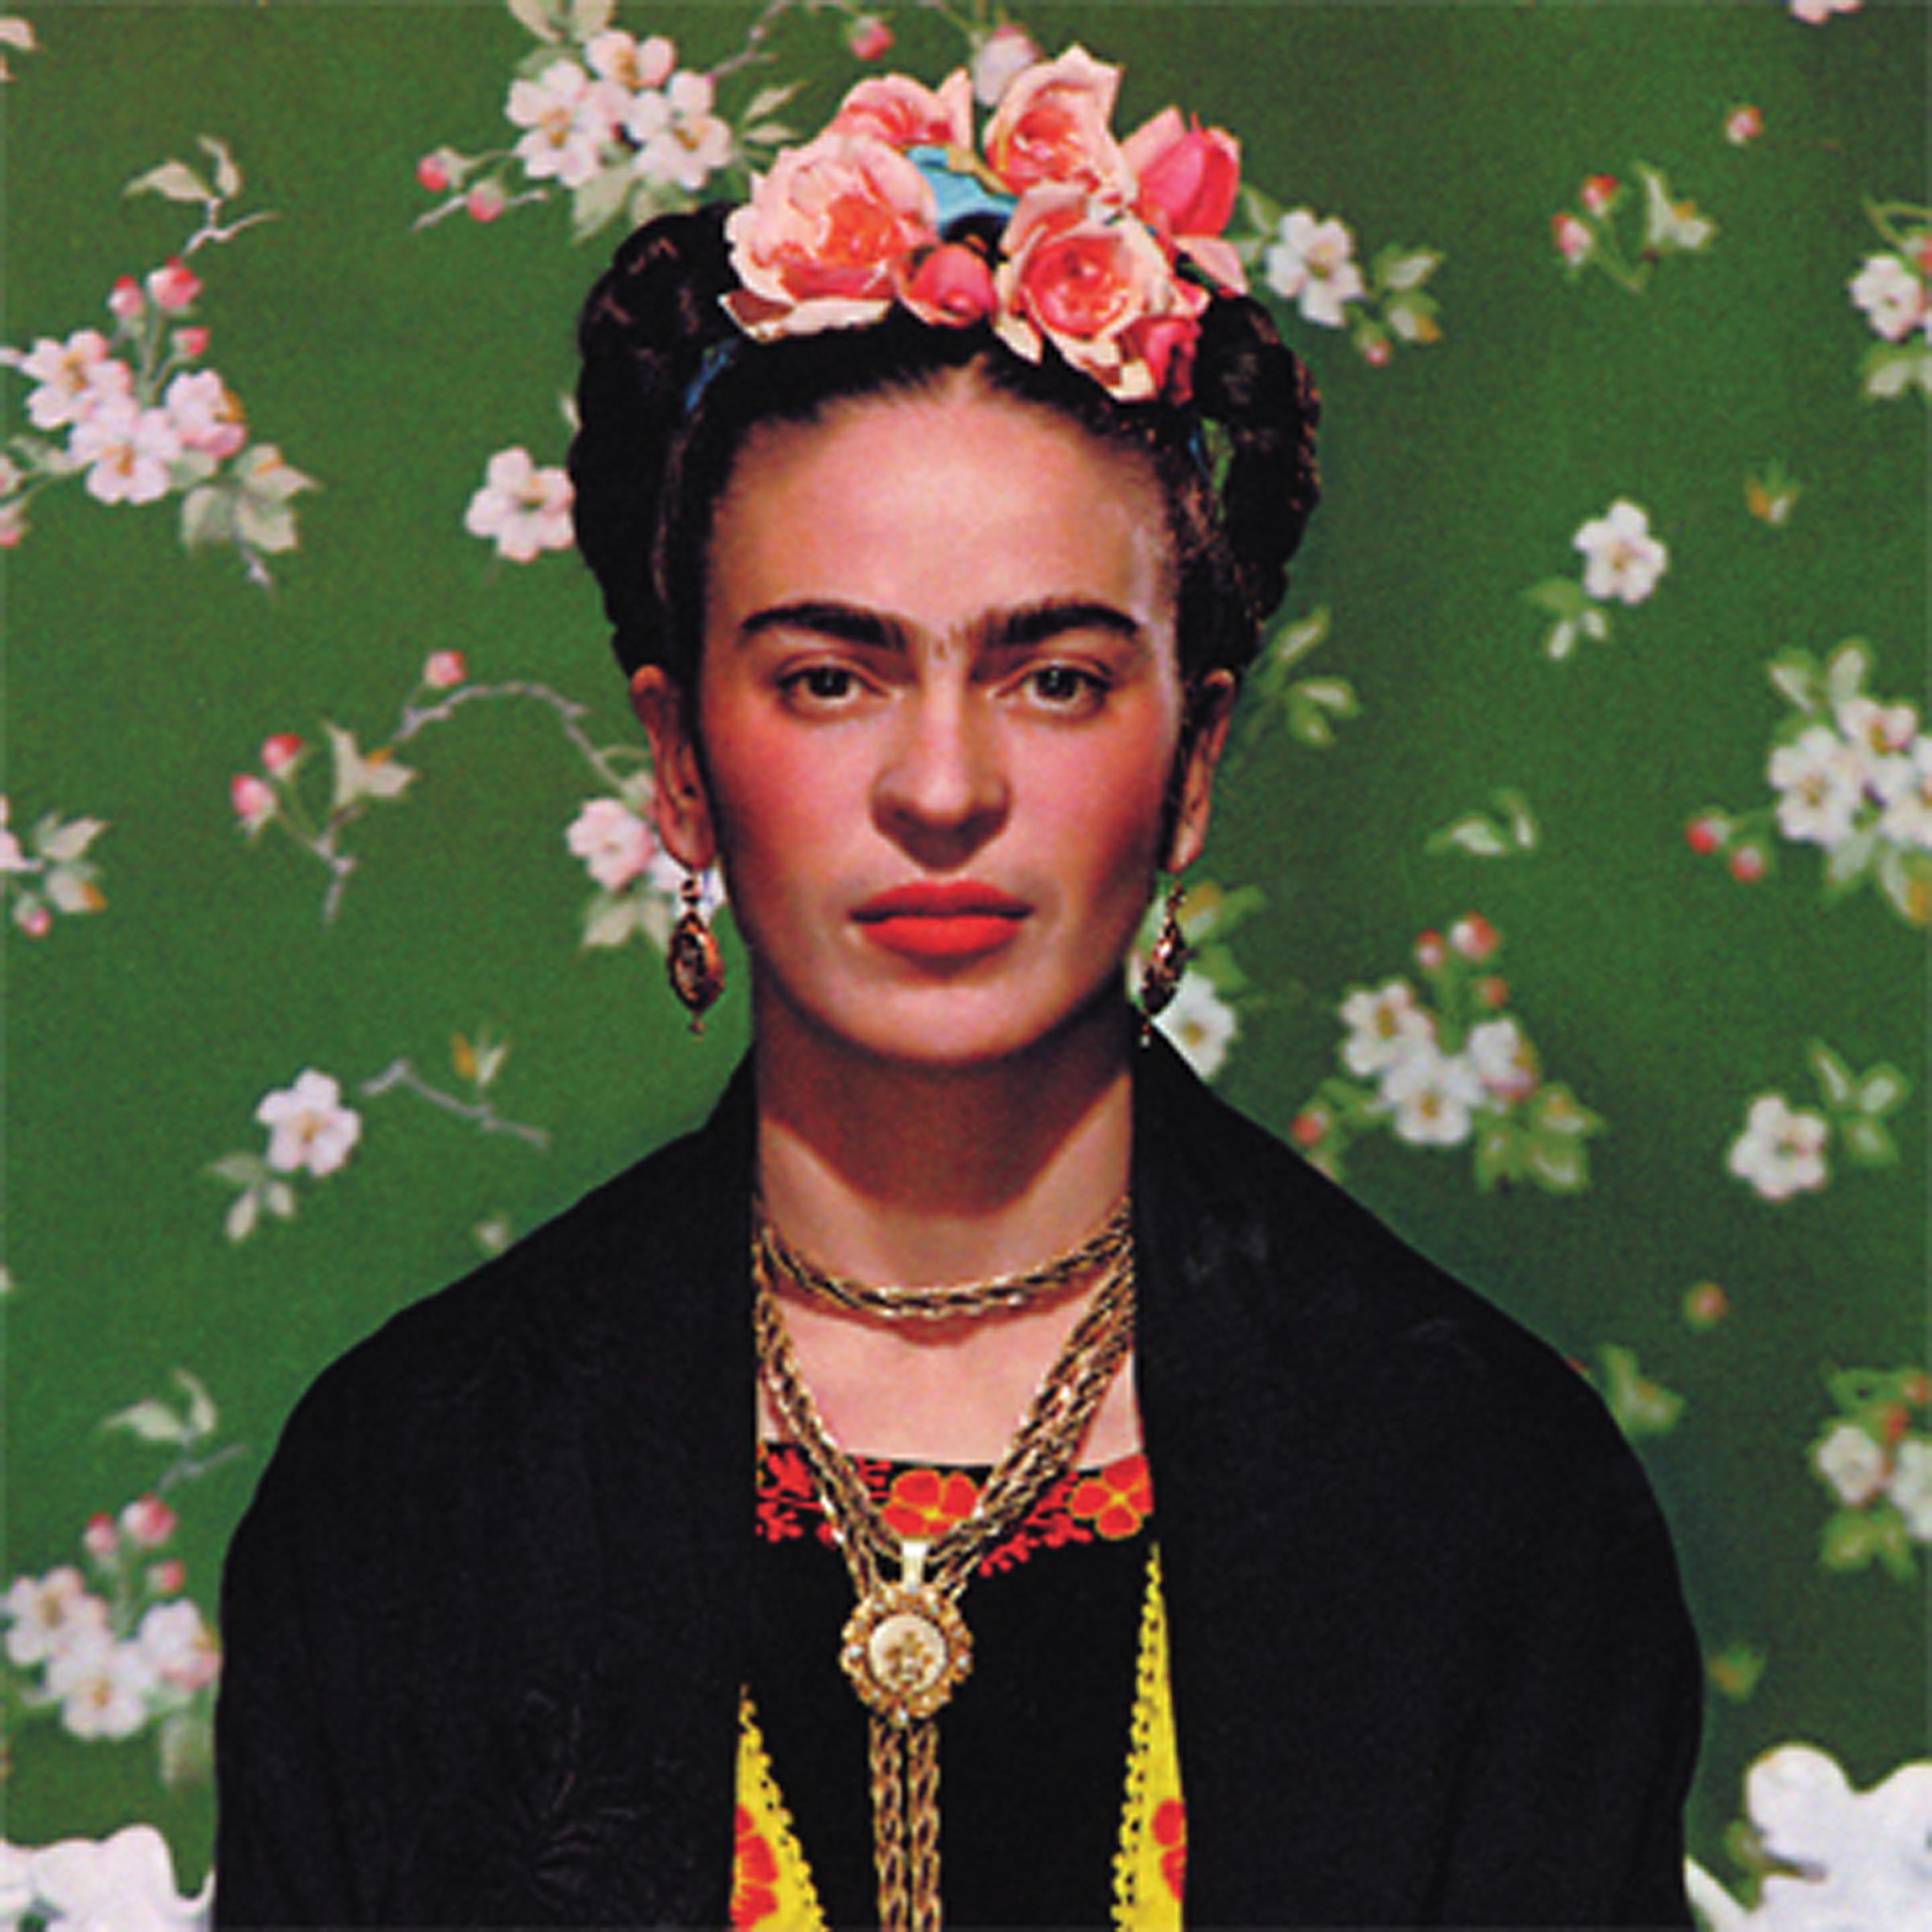 “Frida on White Bench,” photograph by Nickolas Muray, 1939. Submitted image